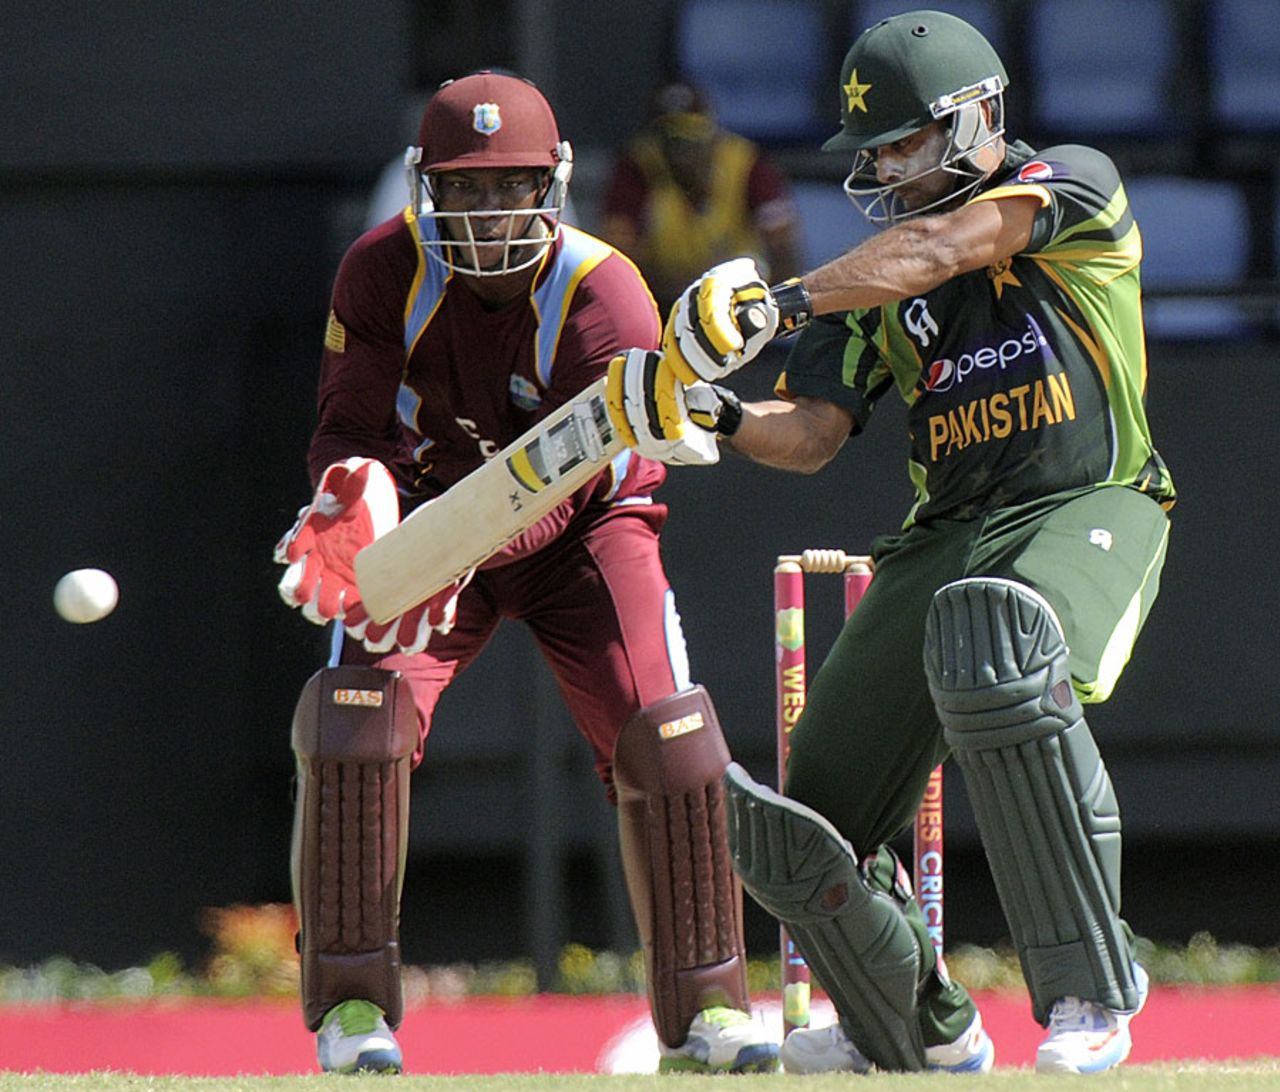 Mohammad Hafeez cuts during his 59, West Indies v Pakistan, 4th ODI, St Lucia, July 21, 2013